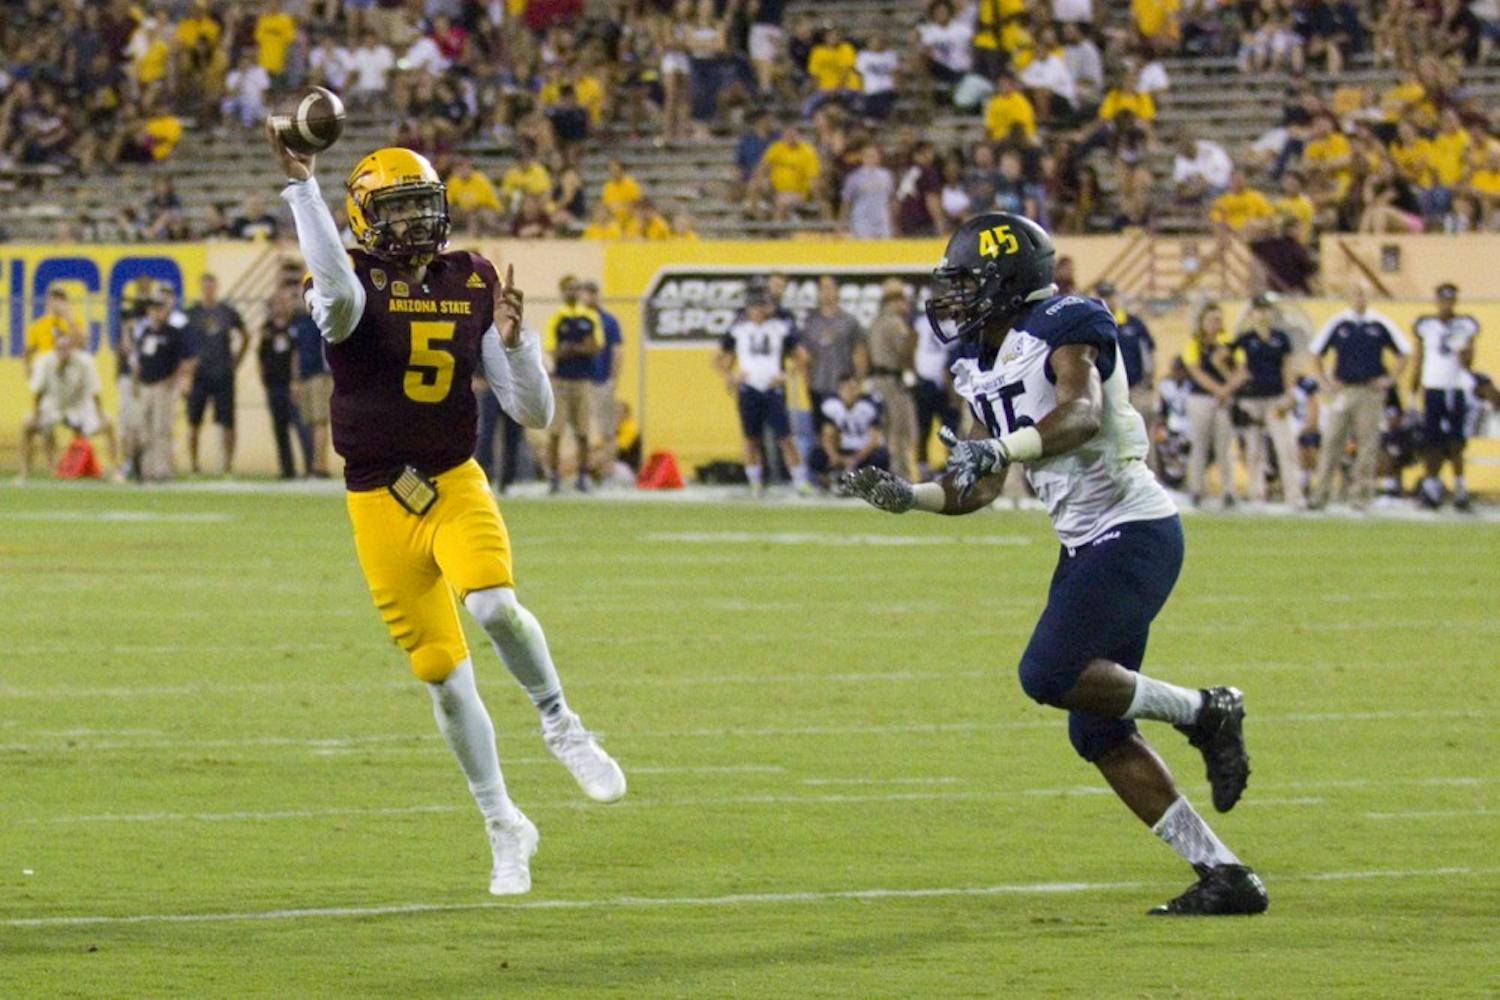 Arizona State redshirt sophomore quarterback Manny Wilkins looks to pass for a touchdown during the 44-13 victory against the Northern Arizona University Lumberjacks in Sun Devil Stadium in Tempe, Arizona, on Saturday, September 3, 2016.